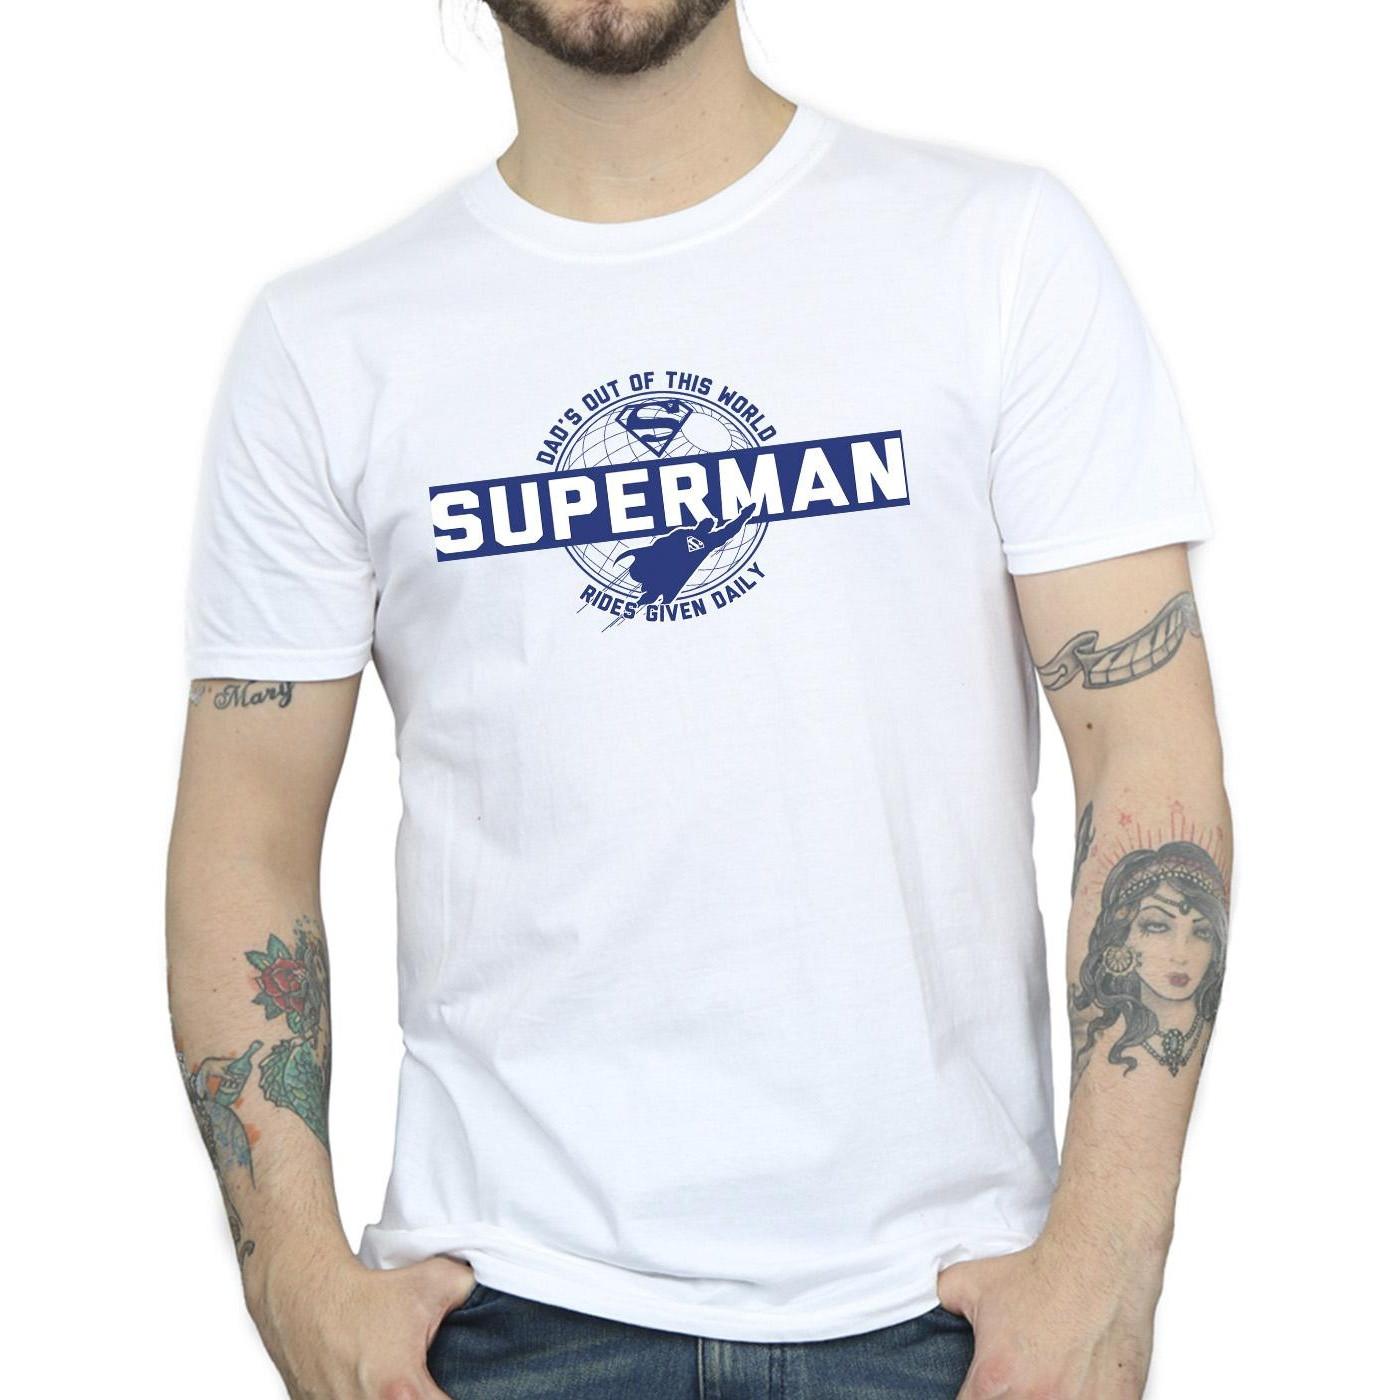 DC COMICS  Tshirt SUPERMAN OUT OF THIS WORLD 